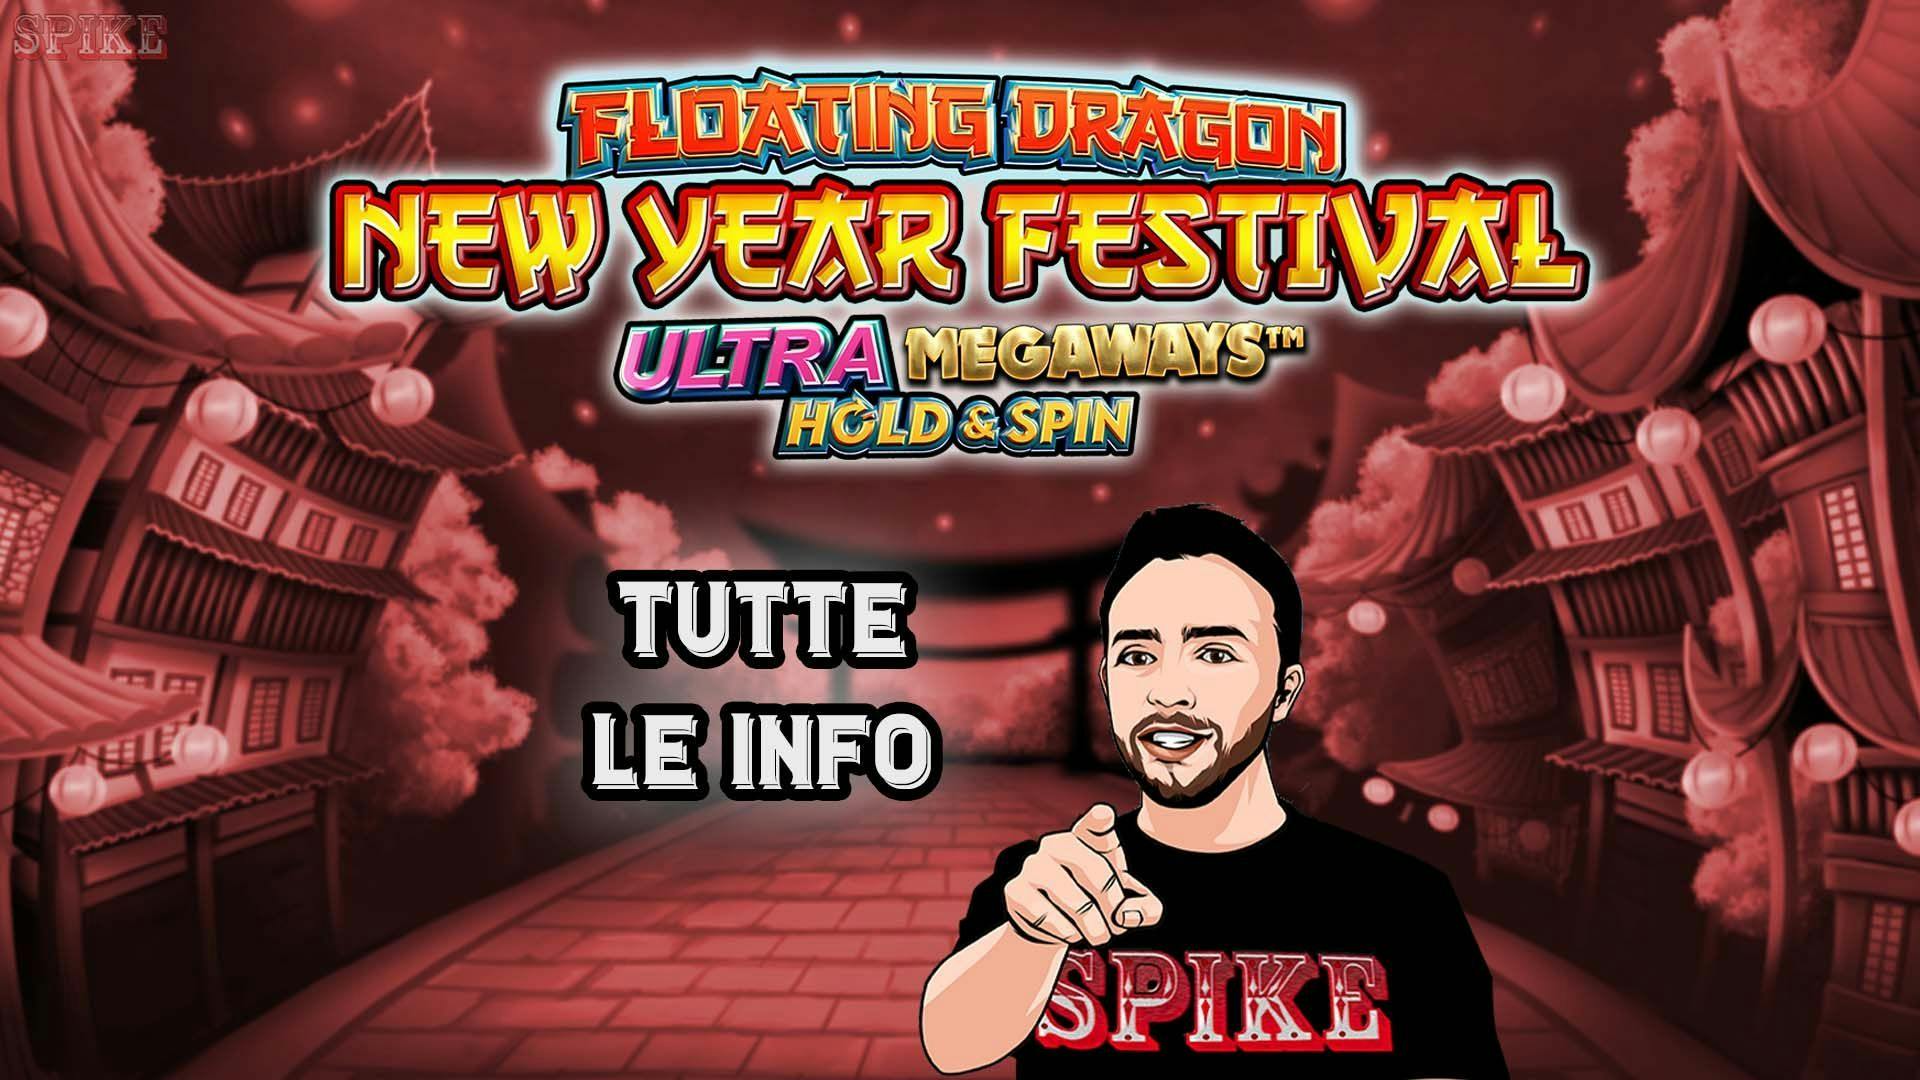 Floating Dragon New Year Festival Ultra Megaways Hold & Spin Slot